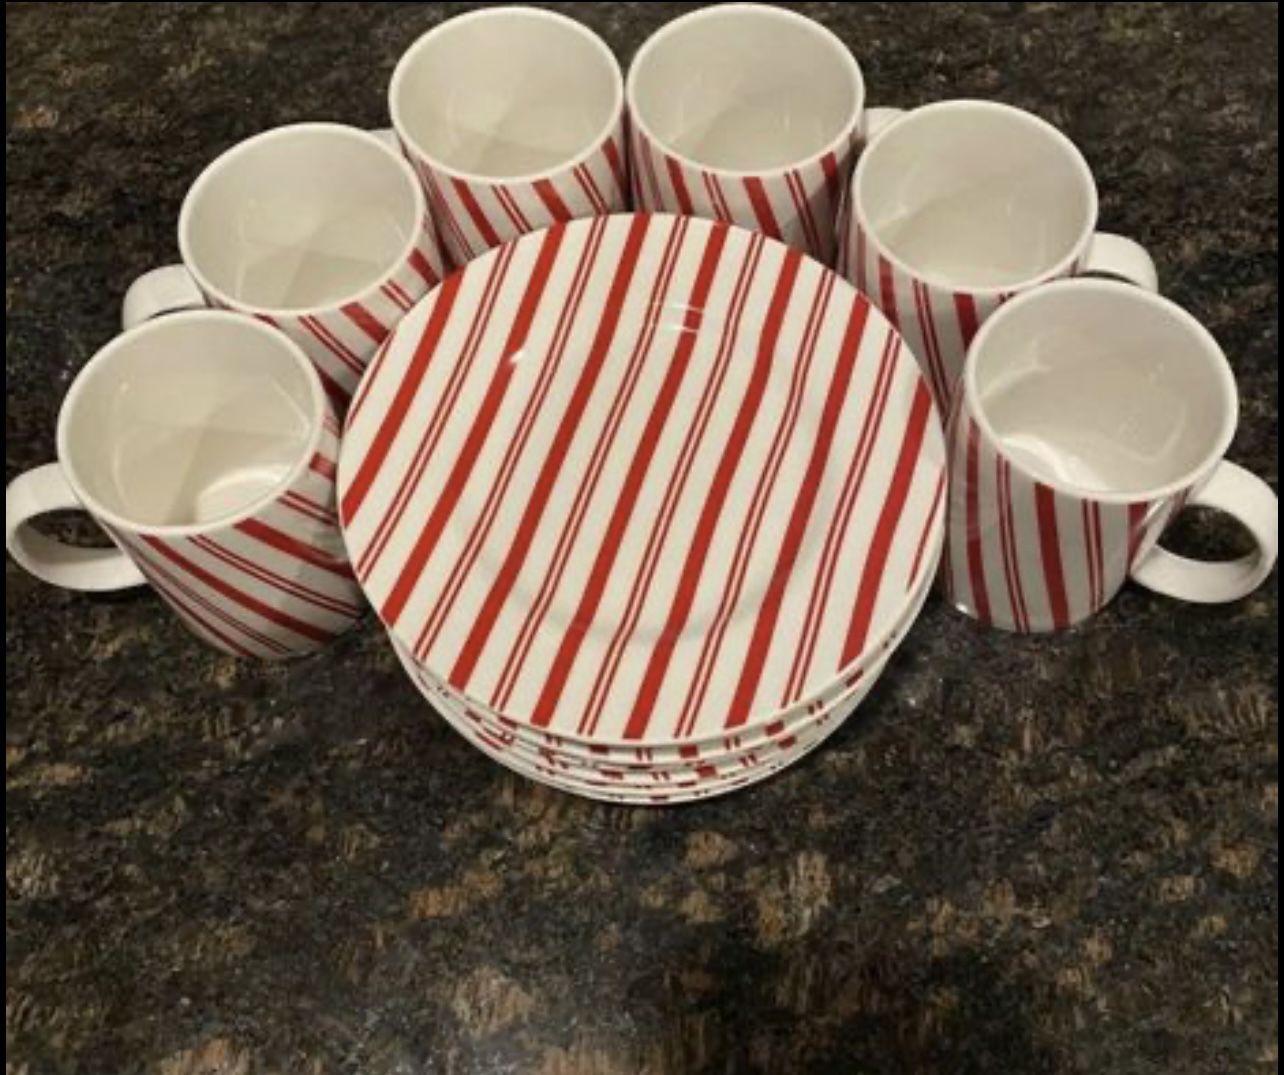 Red and White Cups / Red and White Stripe Cup / Red Stripe Cup / Red Paper  Cup / Red Party Cup / Candy Cane Cup / Red Tableware 